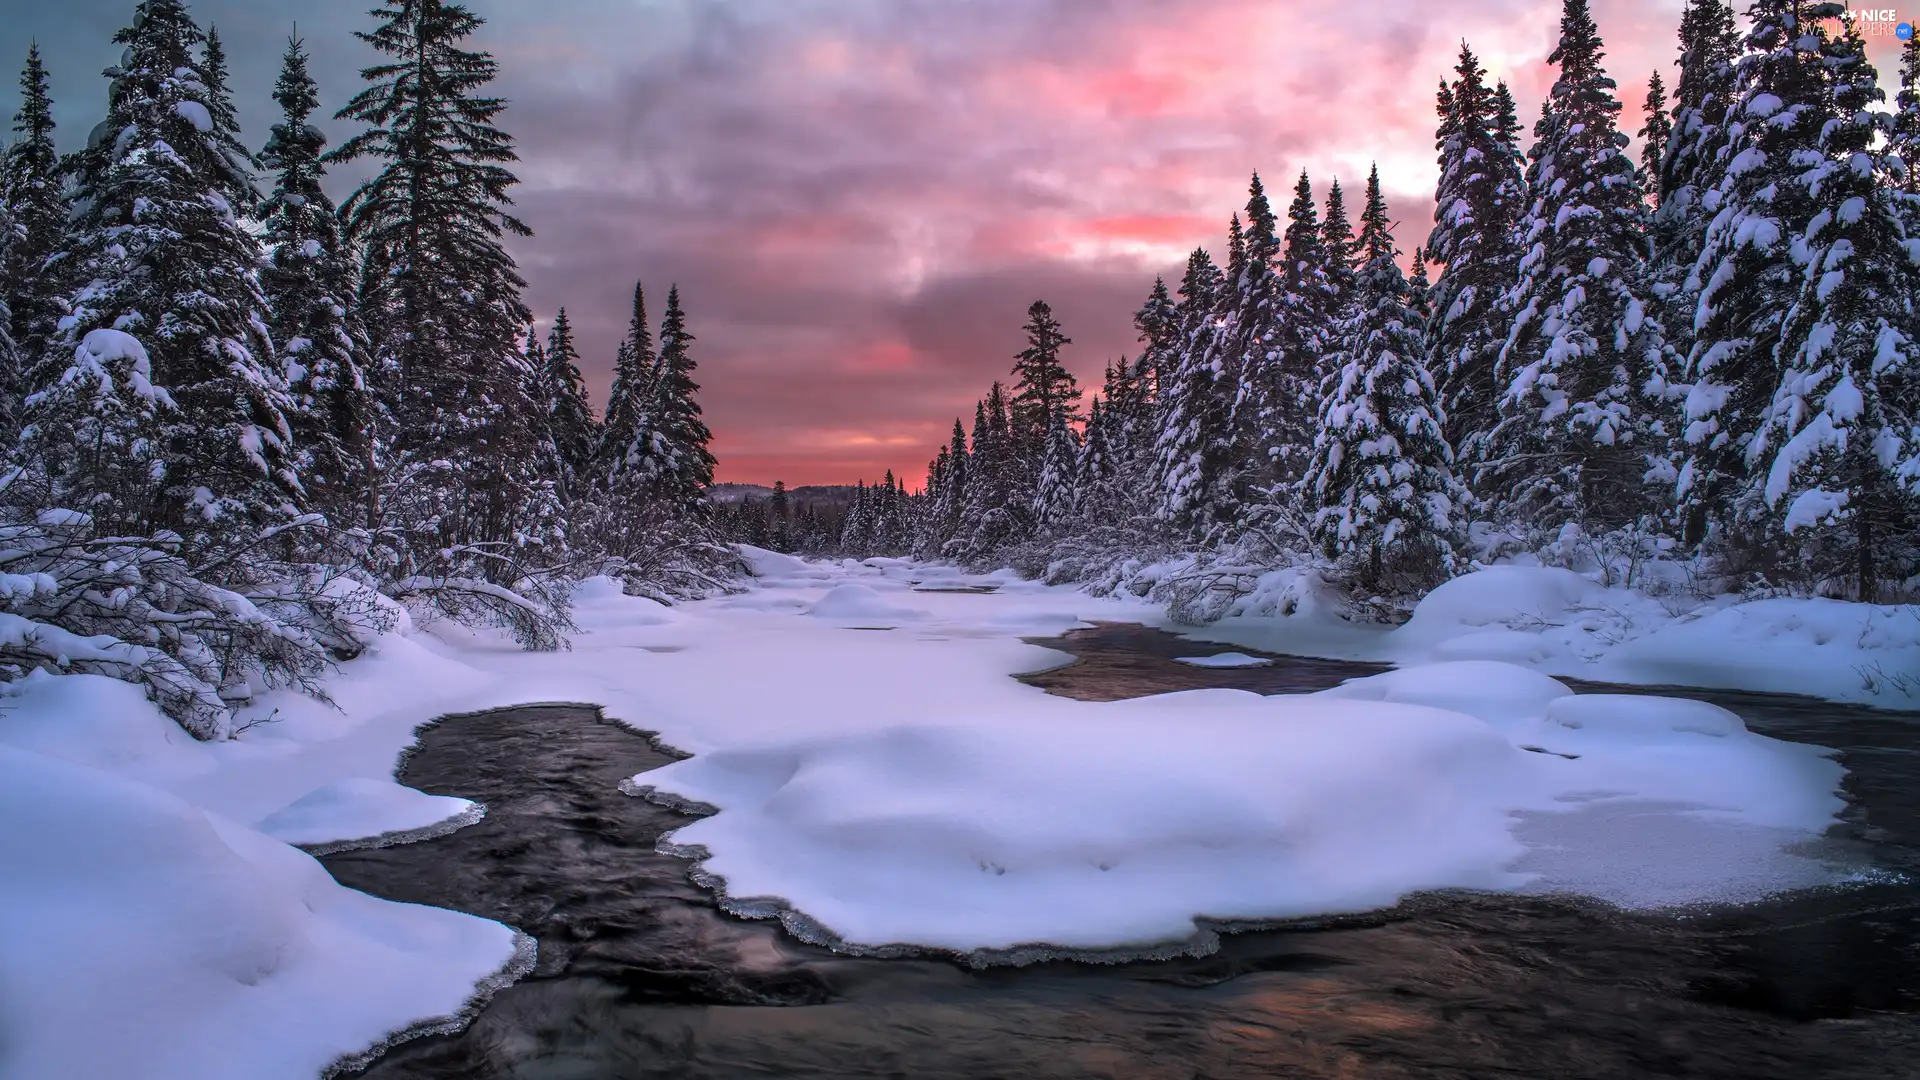 viewes, River, Spruces, trees, winter, Snowy, Great Sunsets